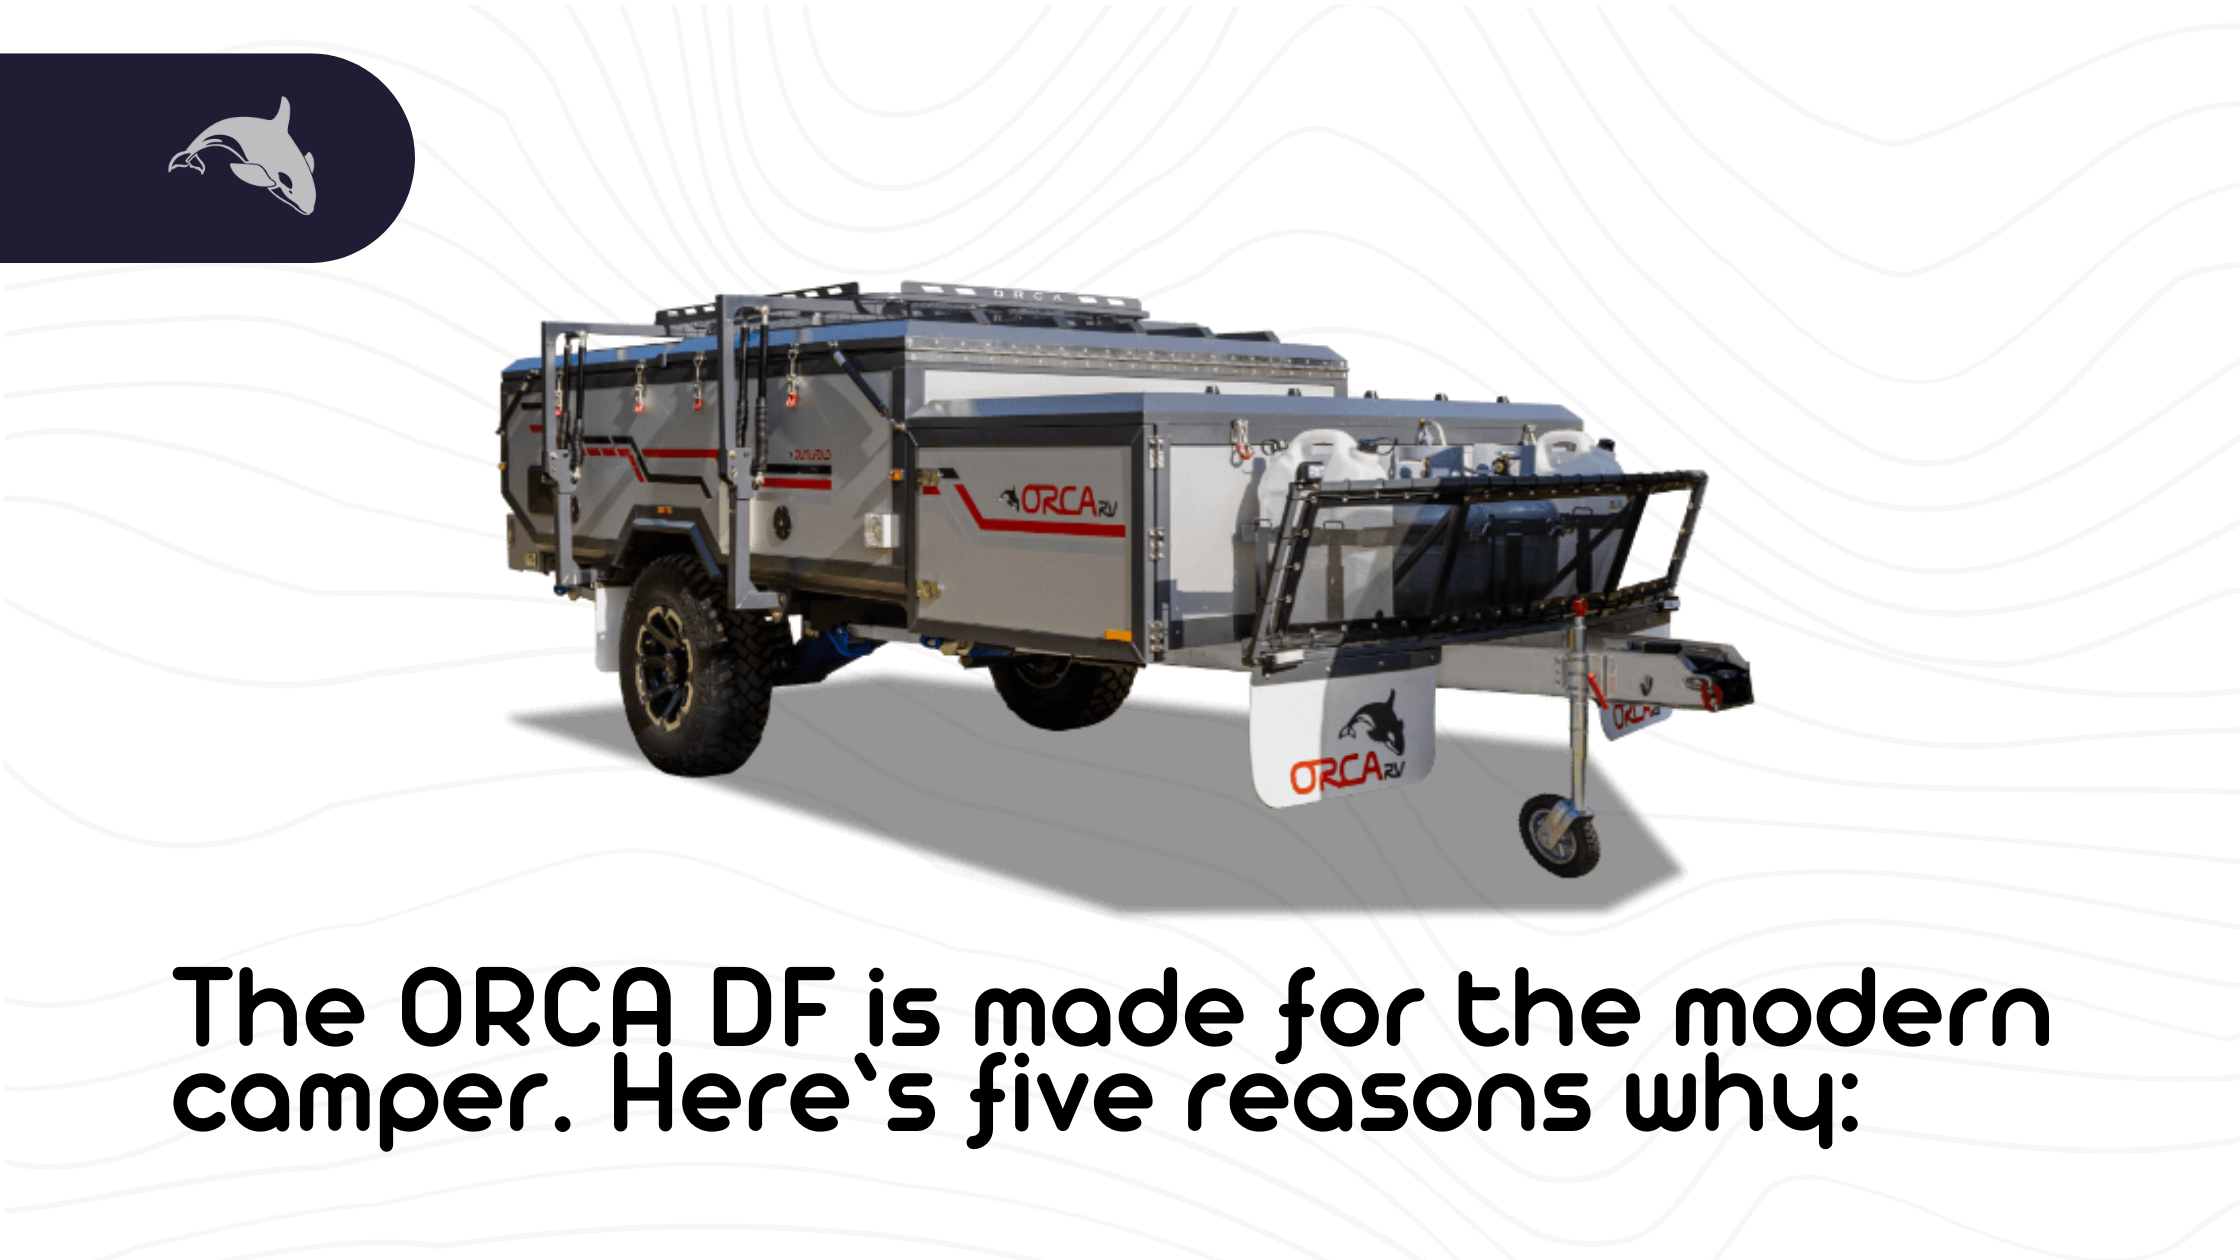 The ORCA DF is made for the modern camper. Here’s five reasons why: